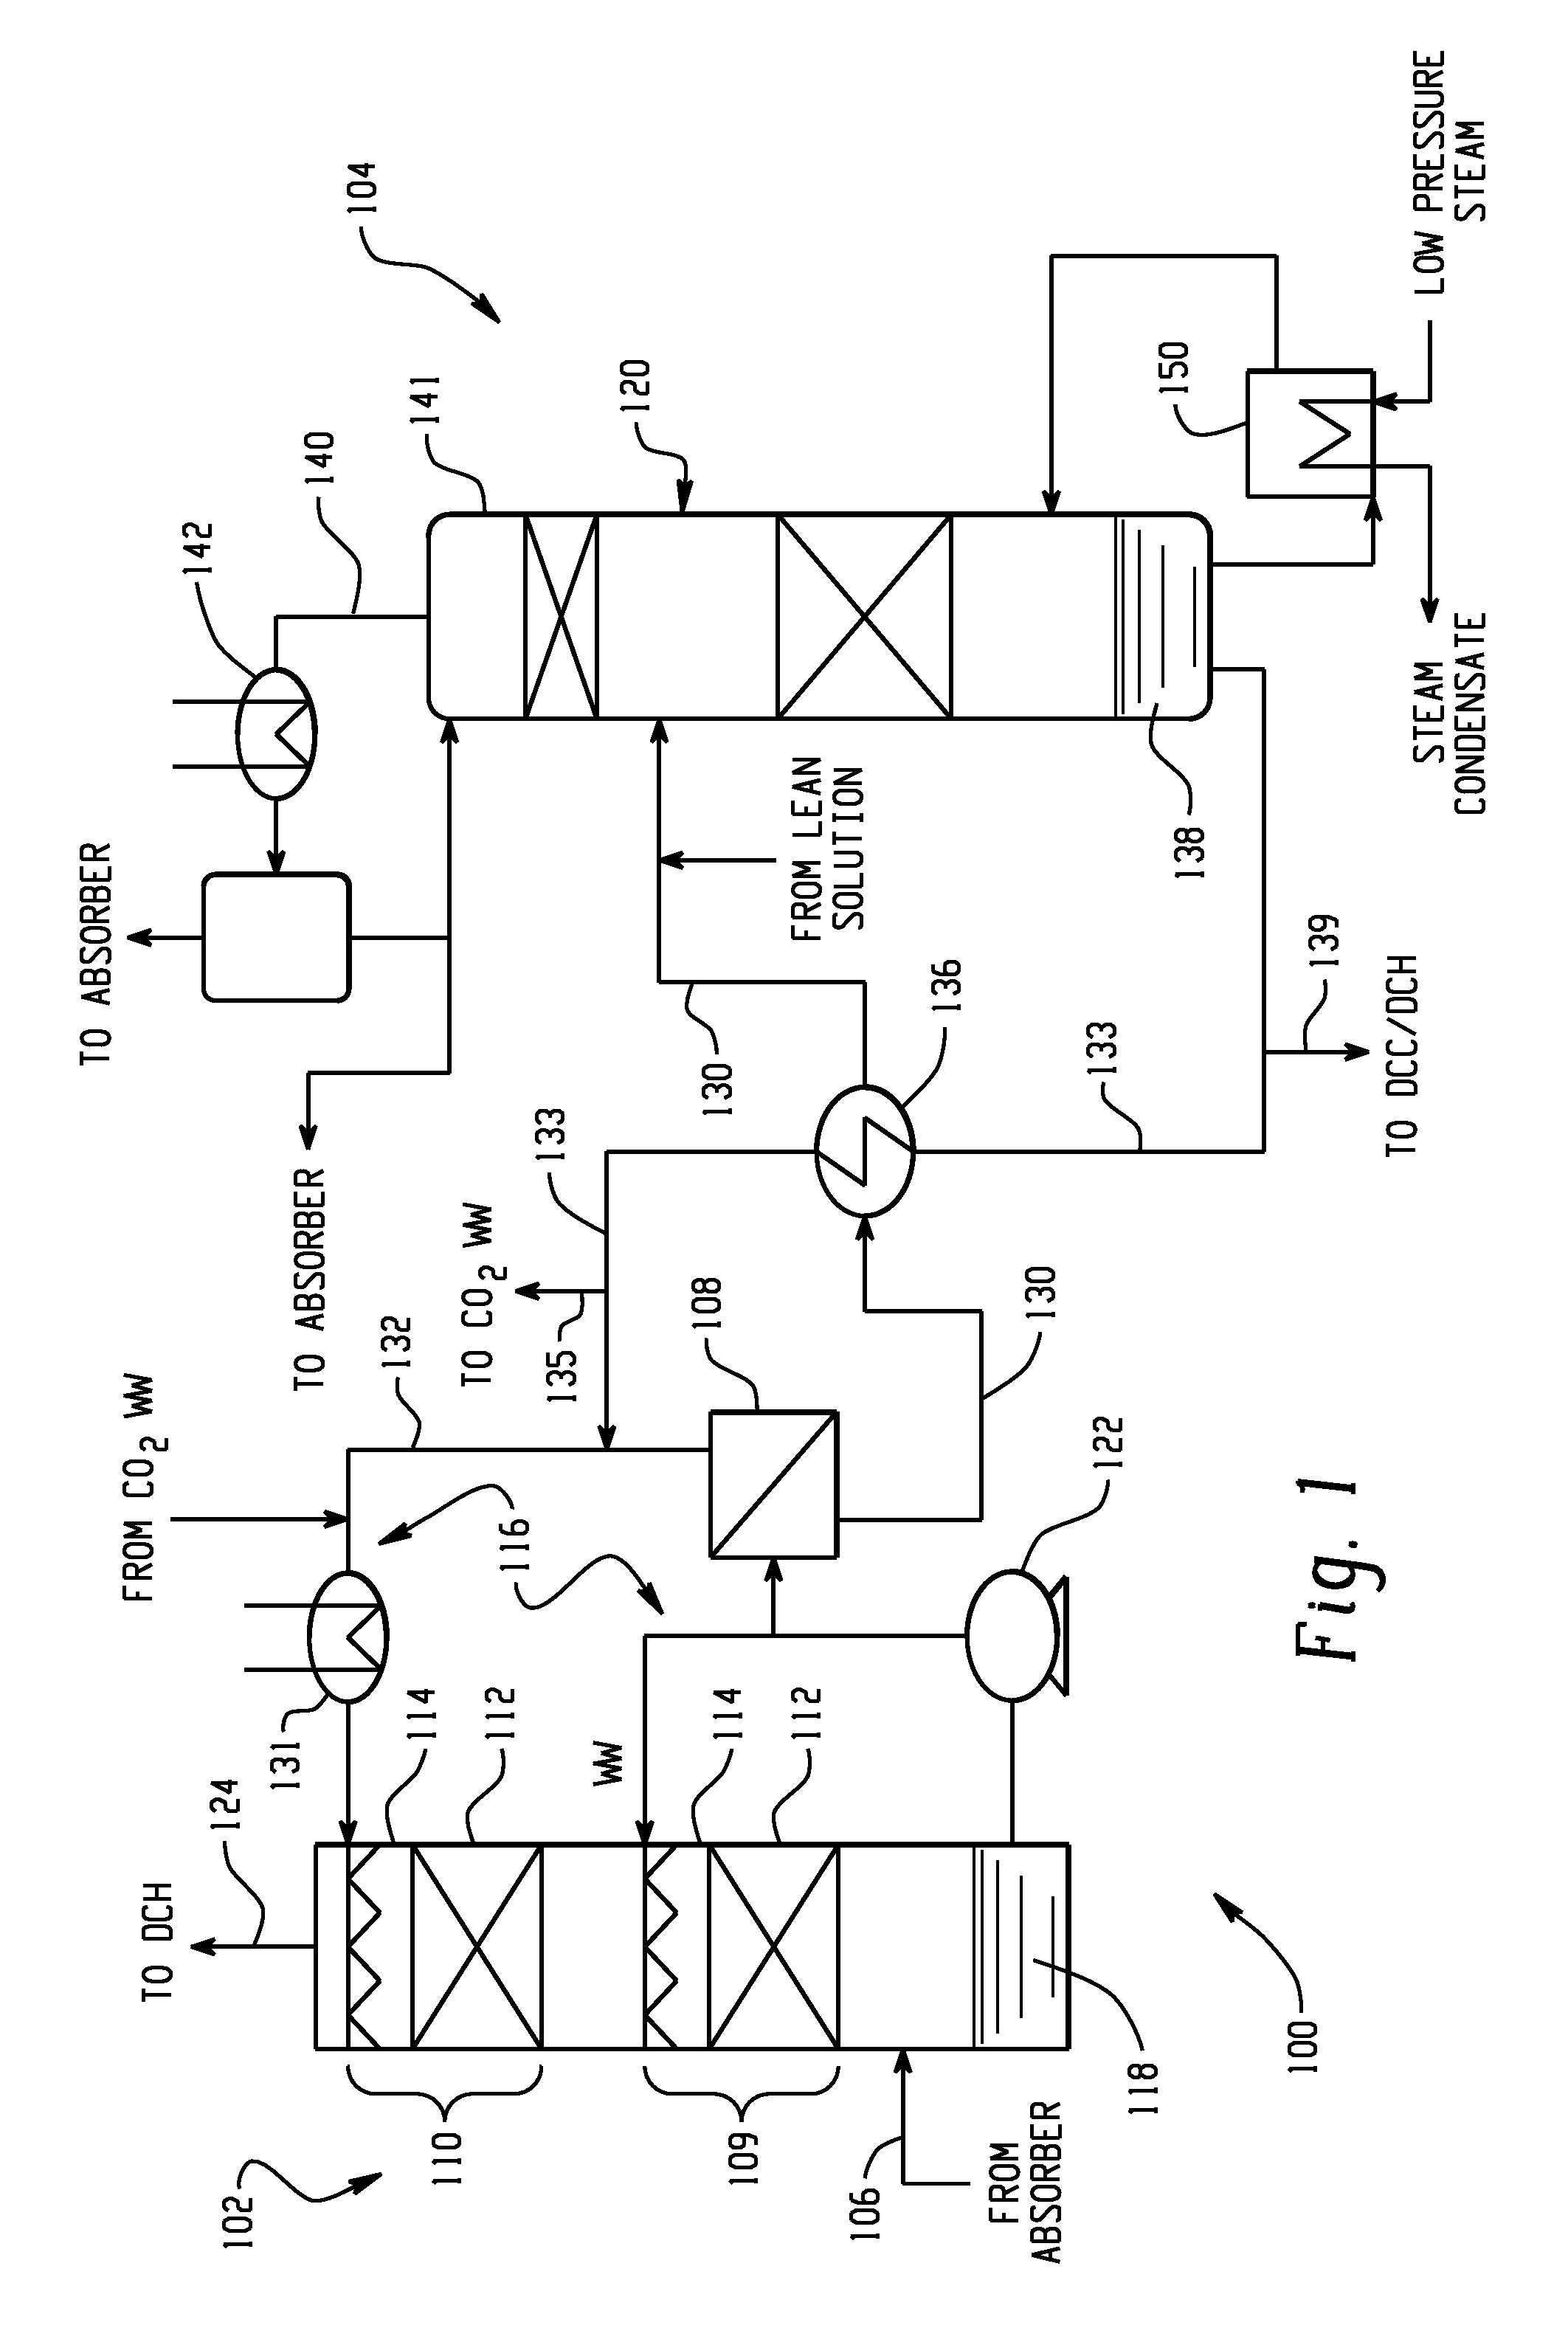 Chilled ammonia based co2 capture system with wash system and processes of use